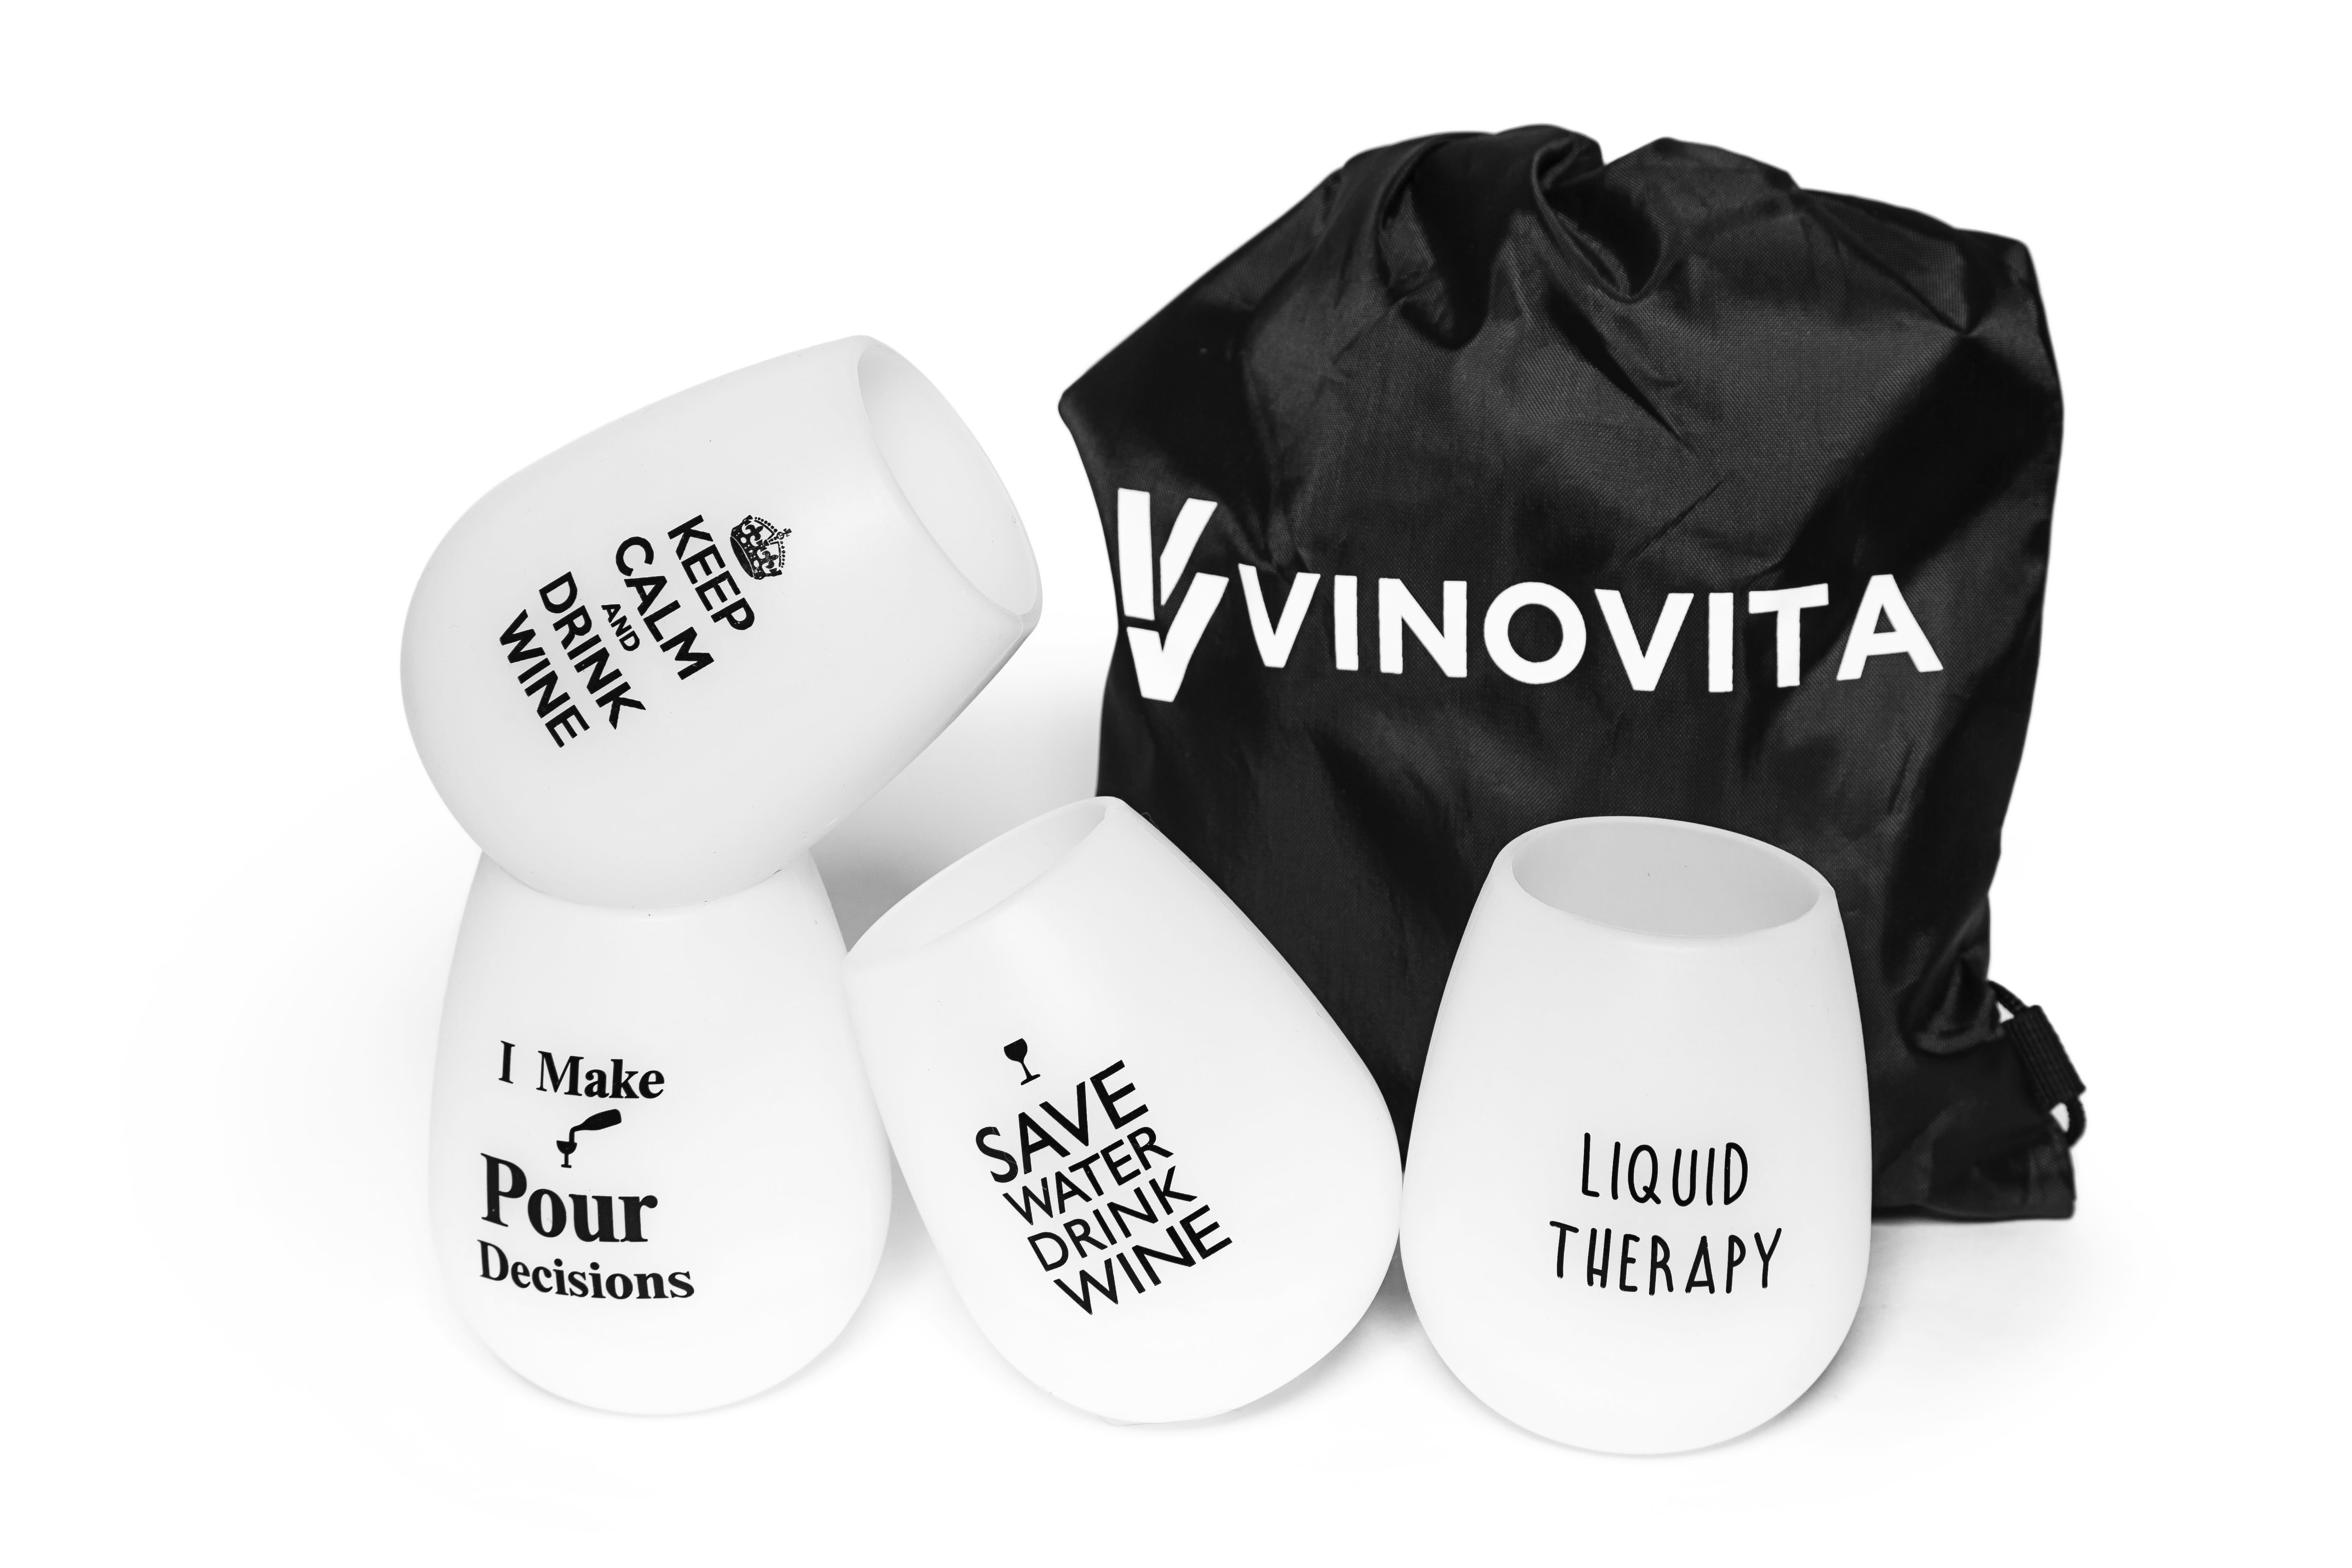 Set of 4 Silicone Wine Glasses with Bag by Vinovita Unbreakable Rubber 12 oz